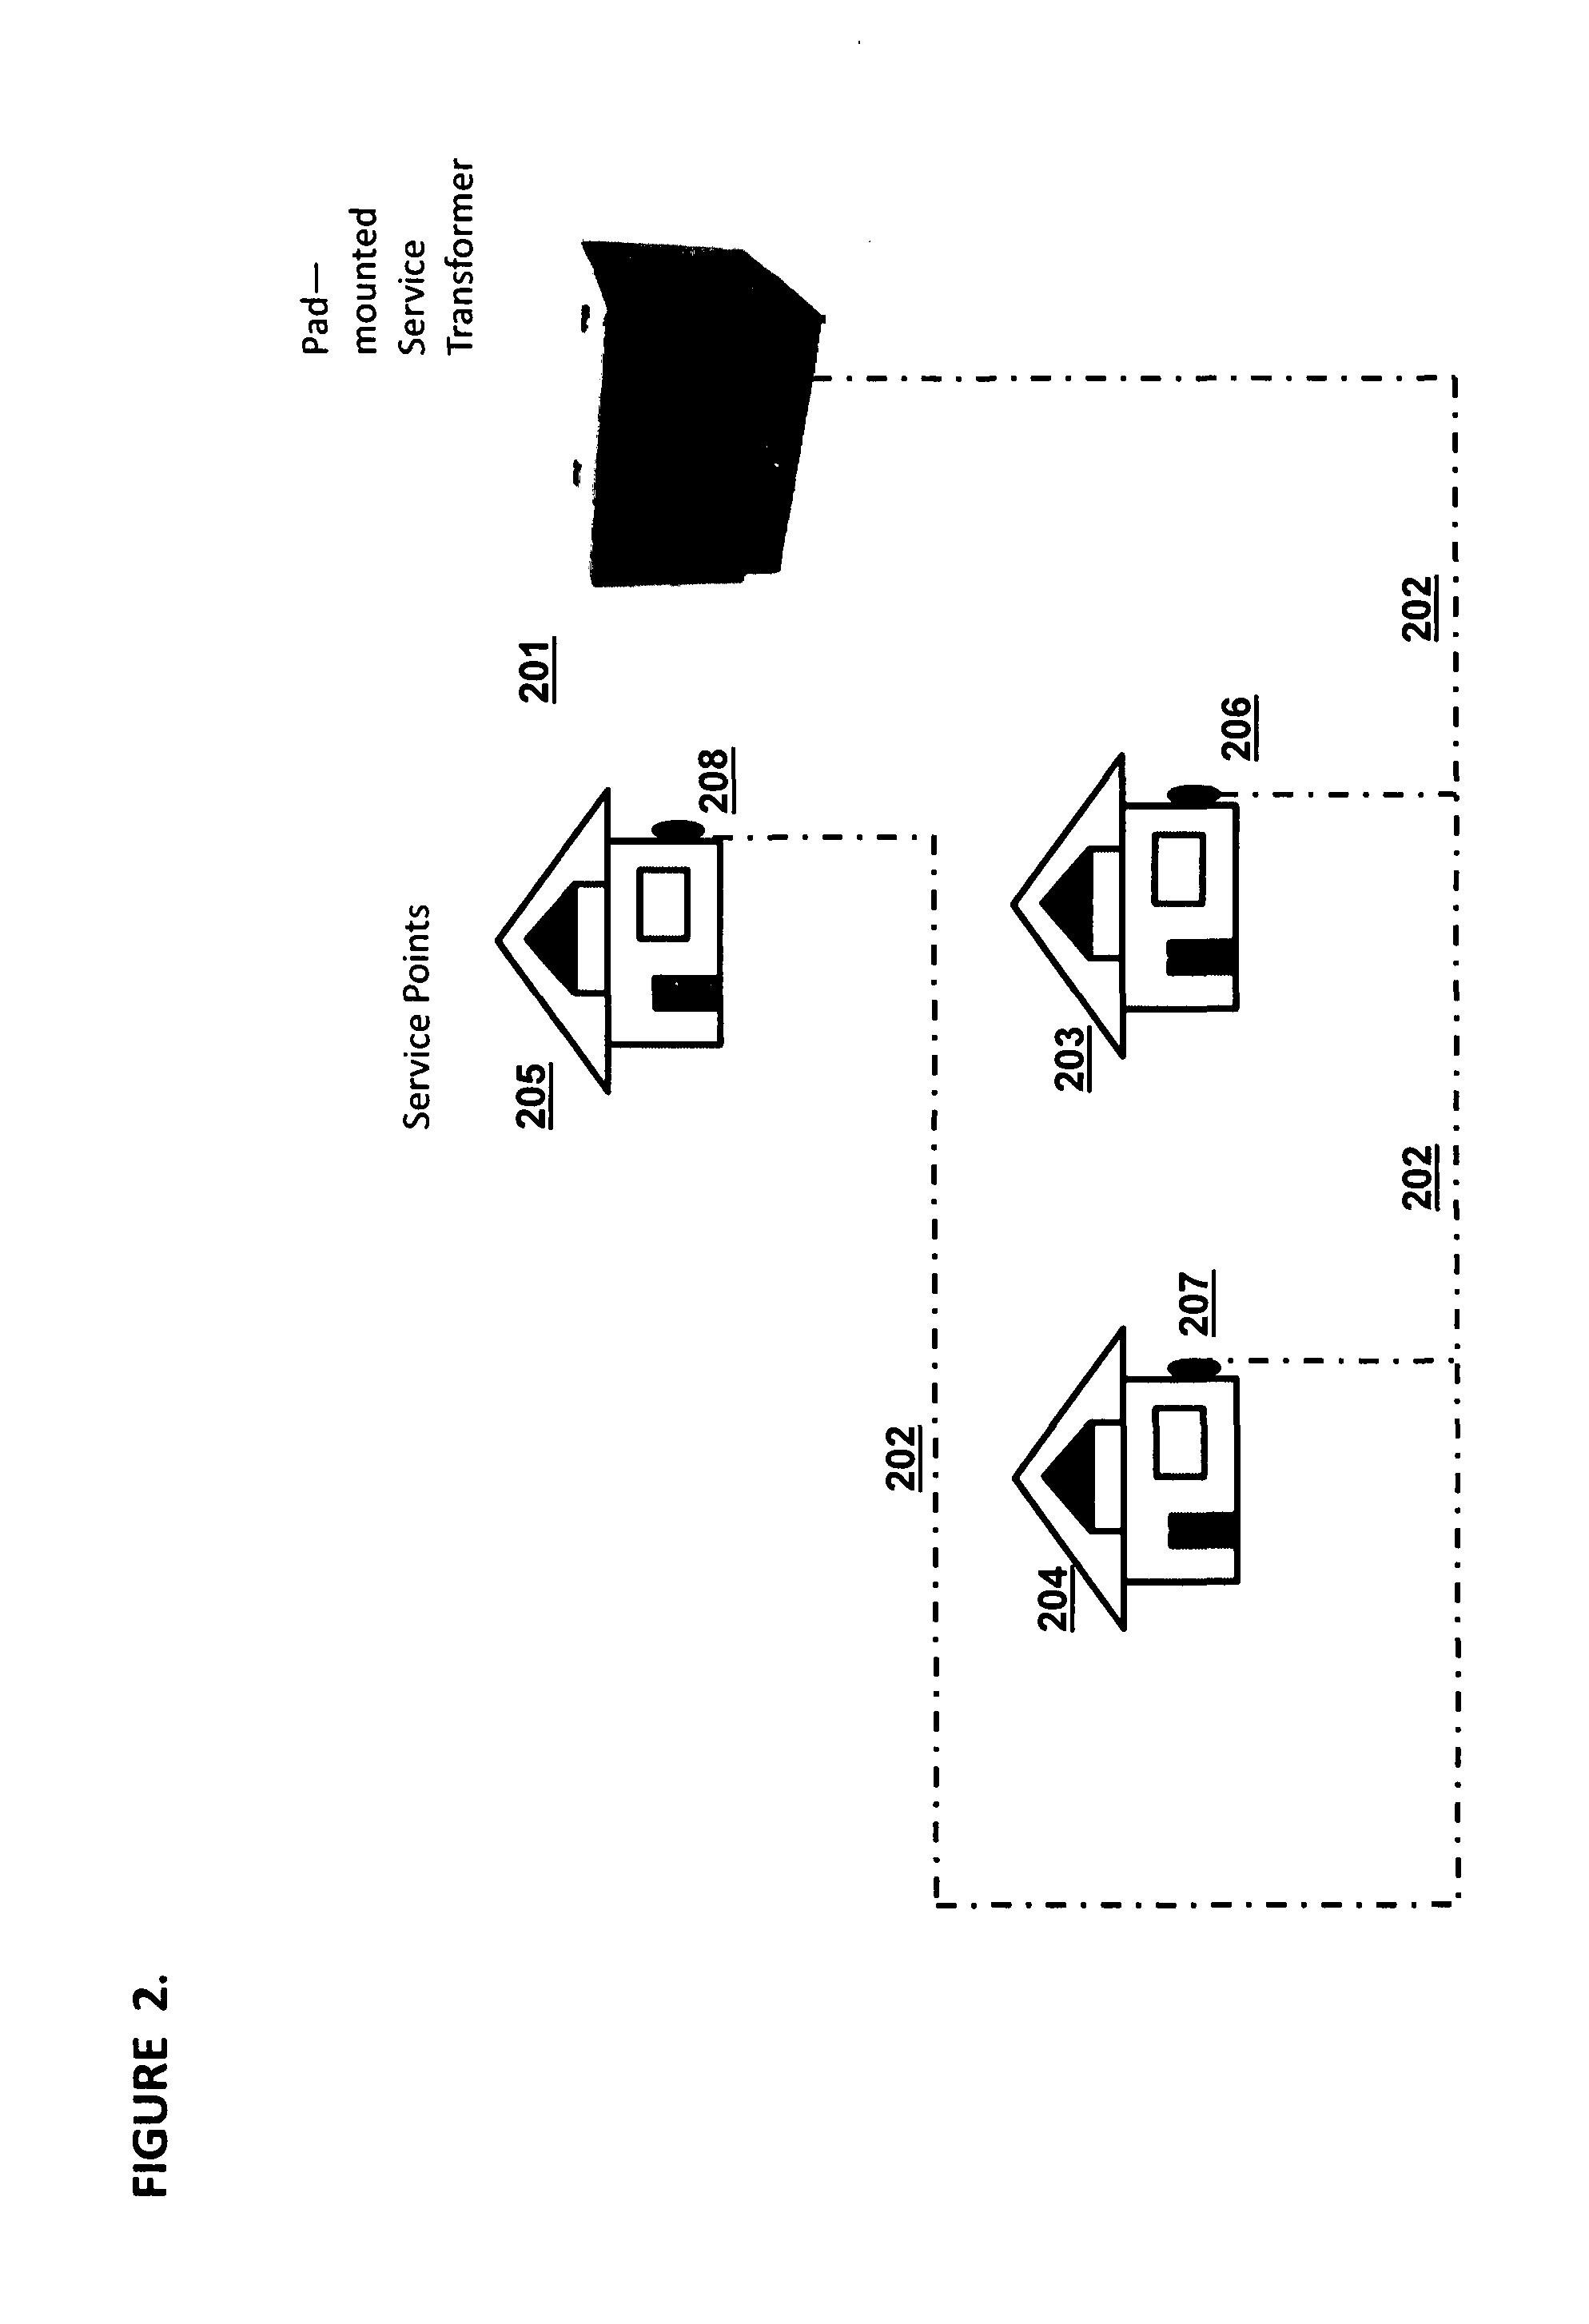 System and method for detecting and localizing non-technical losses in an electrical power distribution grid